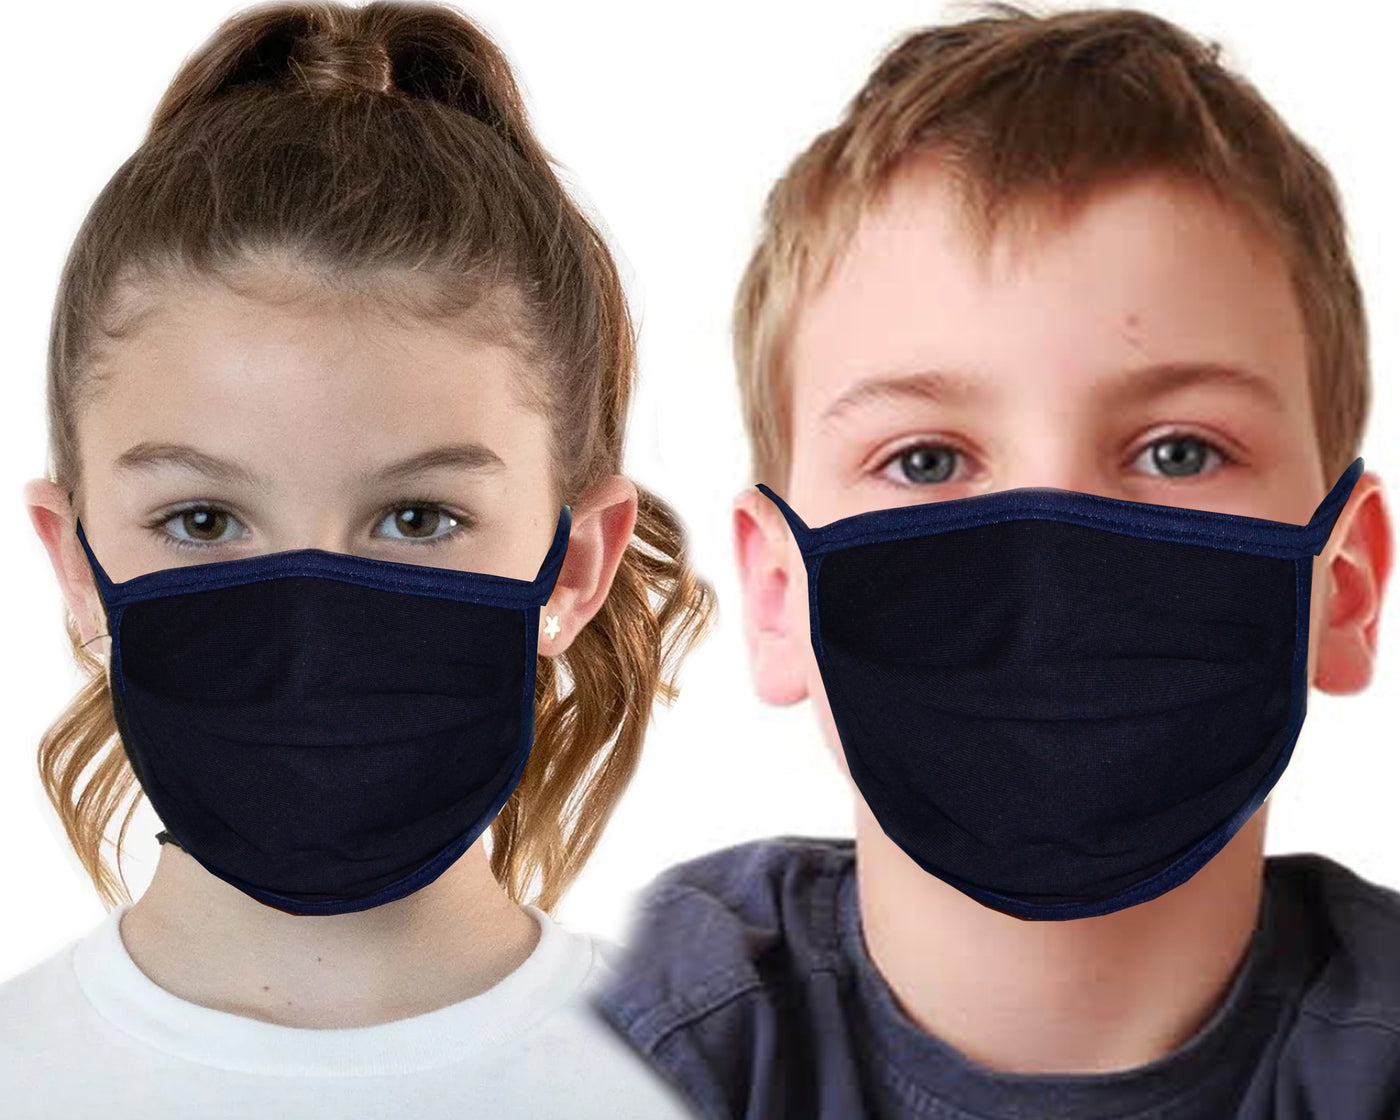 3 Ply Cotton Soft Unisex Face Mask In Black Color For Kids Reusable Mask